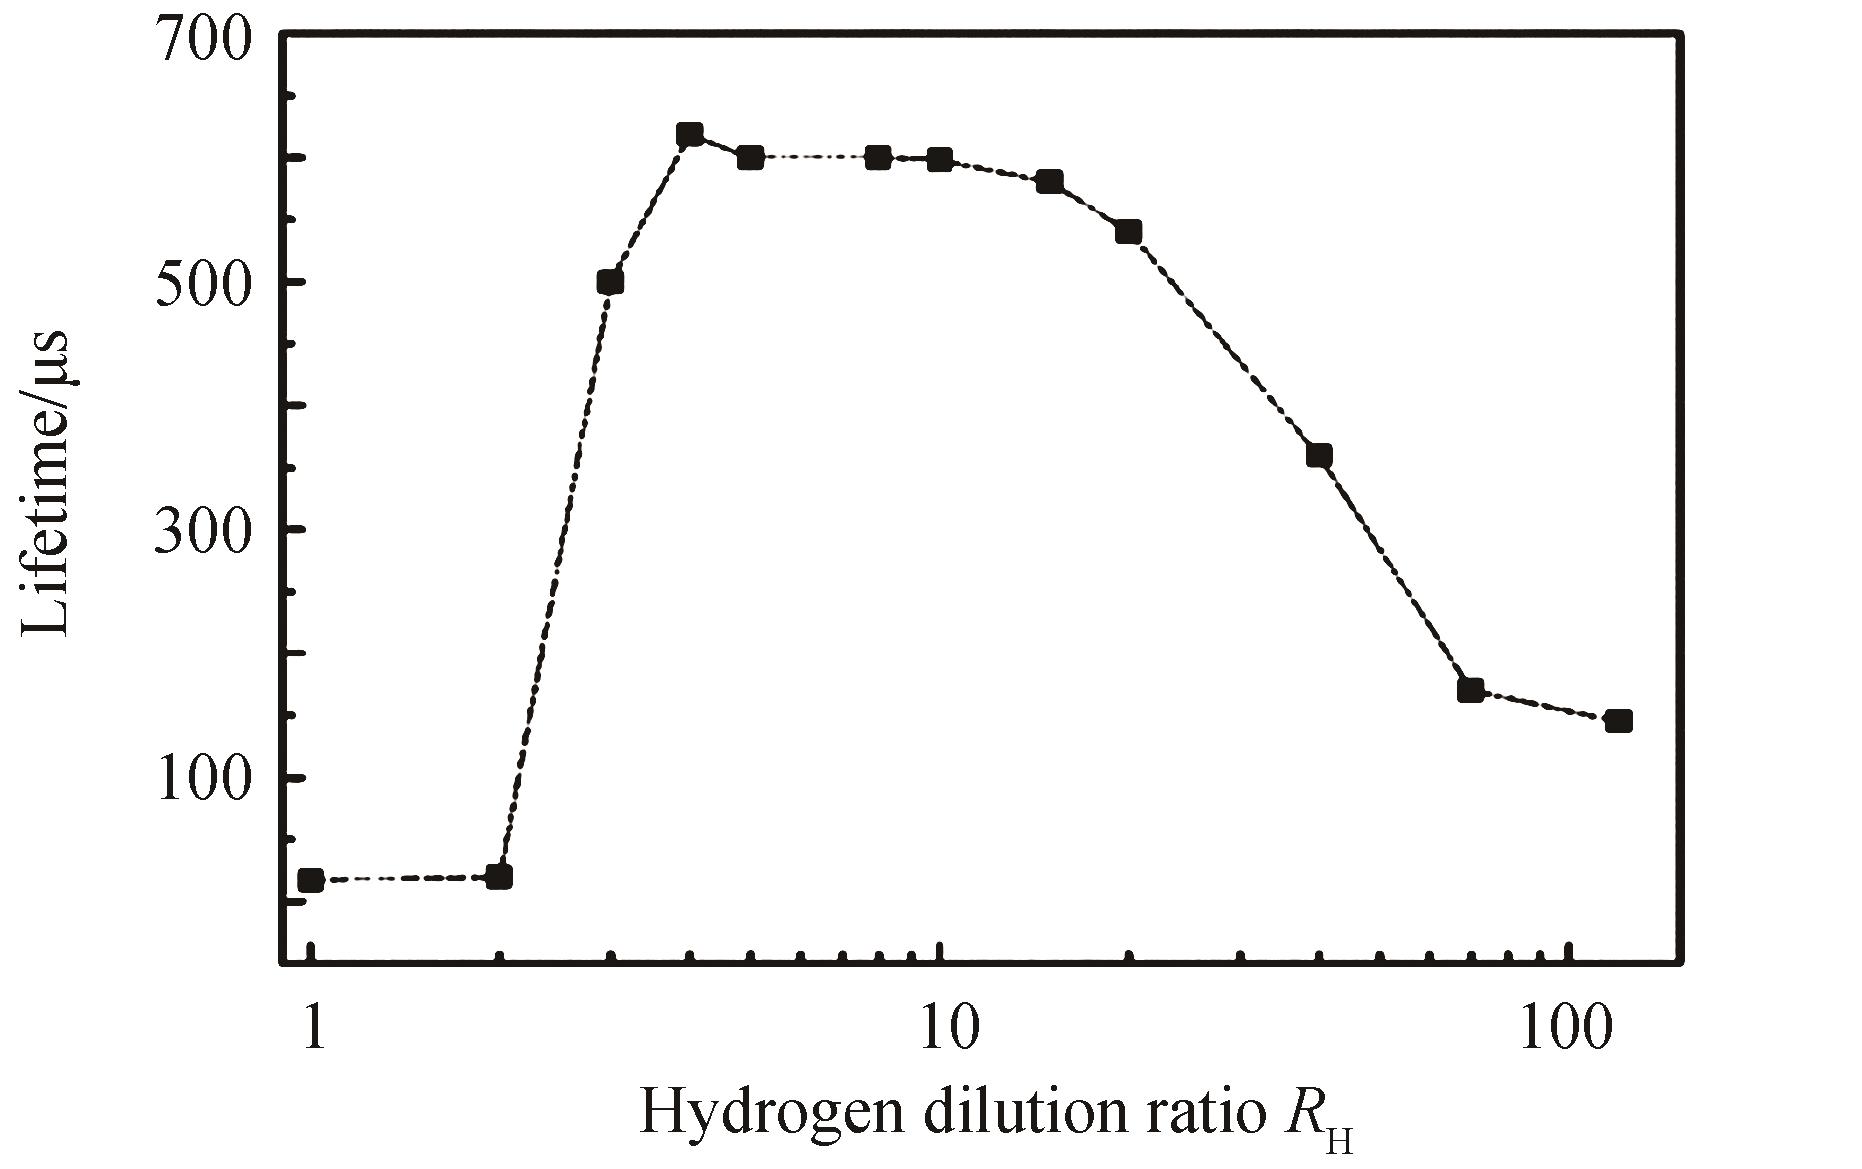 The influence of different hydrogen dilution ratio on passivation effect of amorphous silicon film